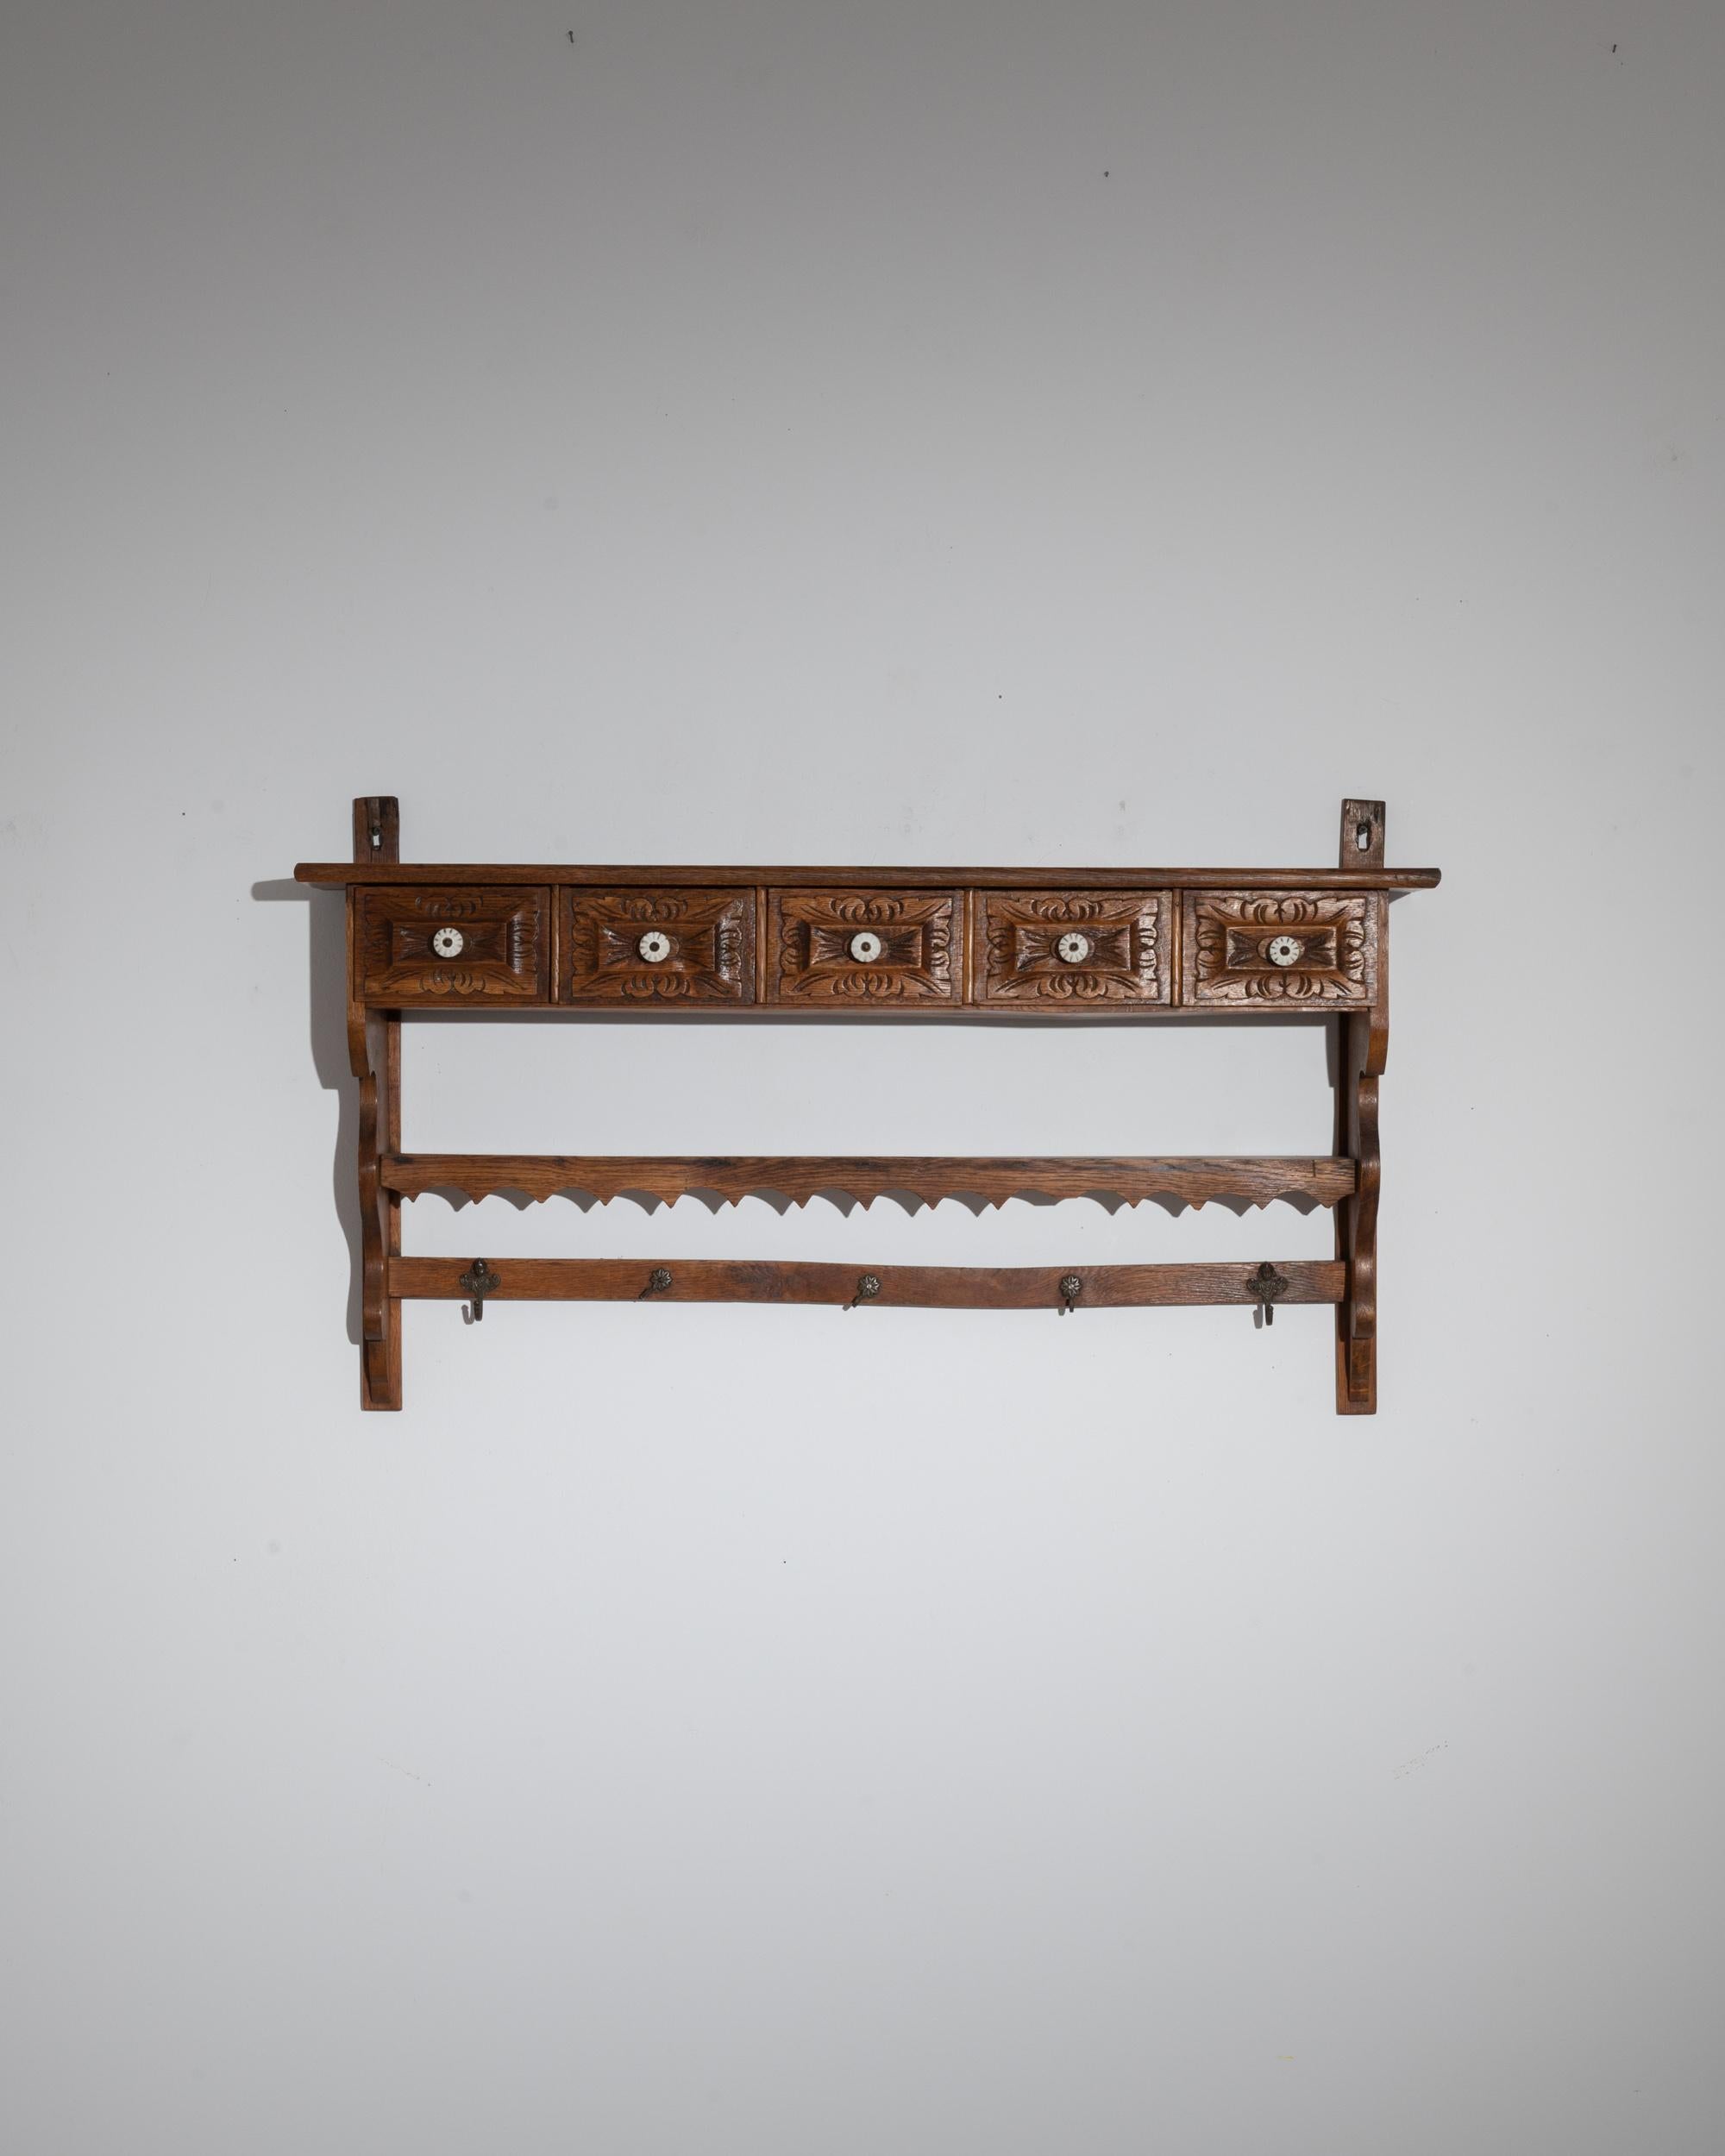 This vintage wooden wall shelf offers a pragmatic storage solution with a charming country demeanor. Made in France at the turn of the 19th century, wooden brackets sandwich an upper shelf, a sequence of five wooden drawers and a line of metal